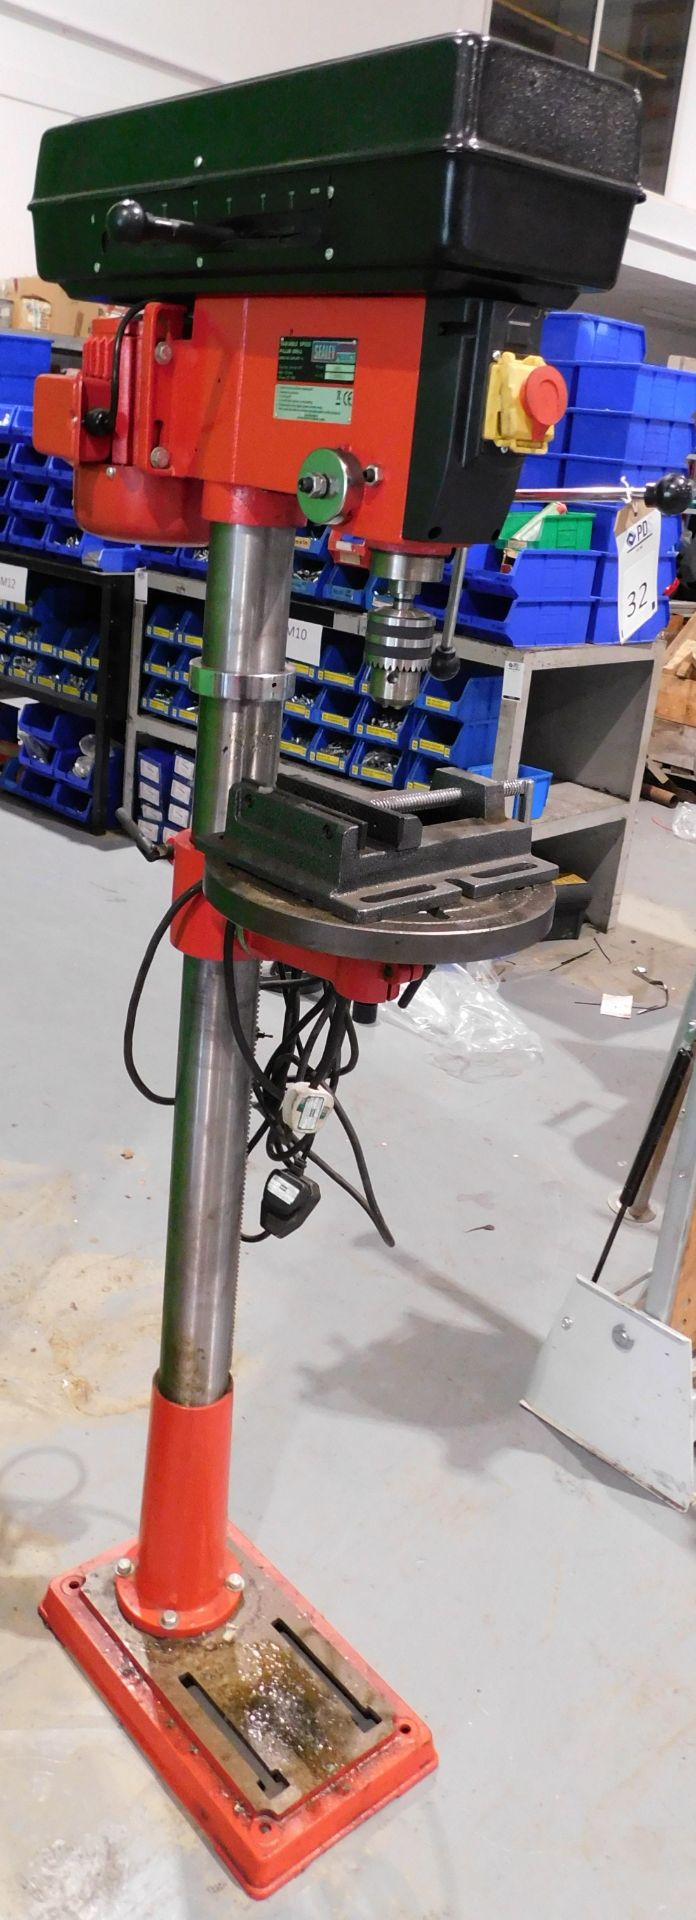 Sealey GDM200F/VS 16mm Variable Speed Pillar Drill, 240v (2017) Serial Number 01012 with Machine - Image 2 of 8